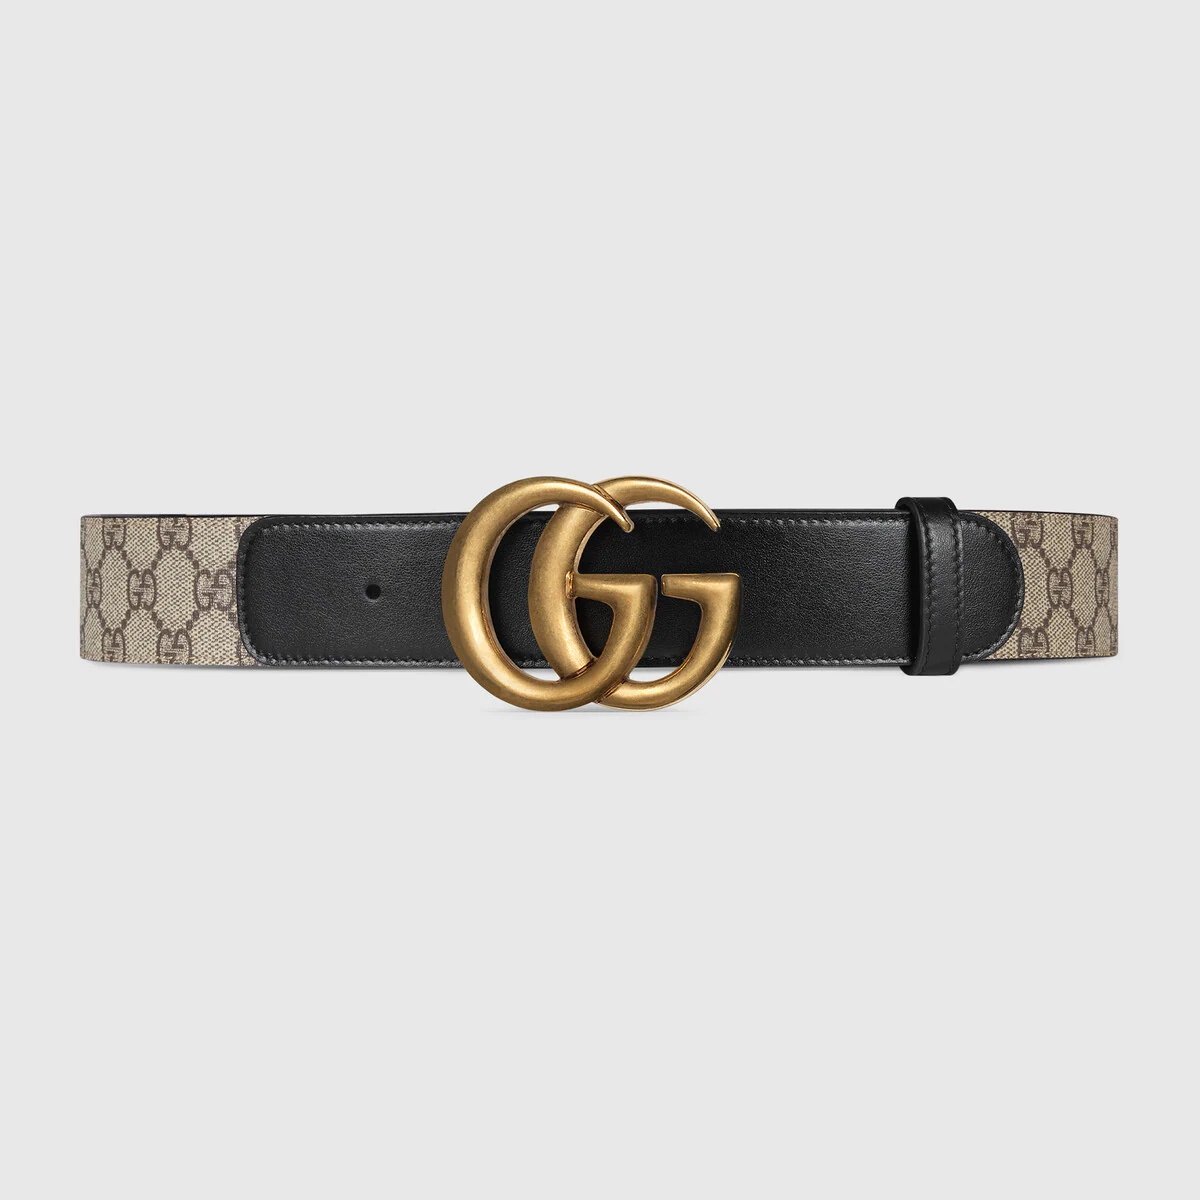 GG belt with Double G buckle - 1